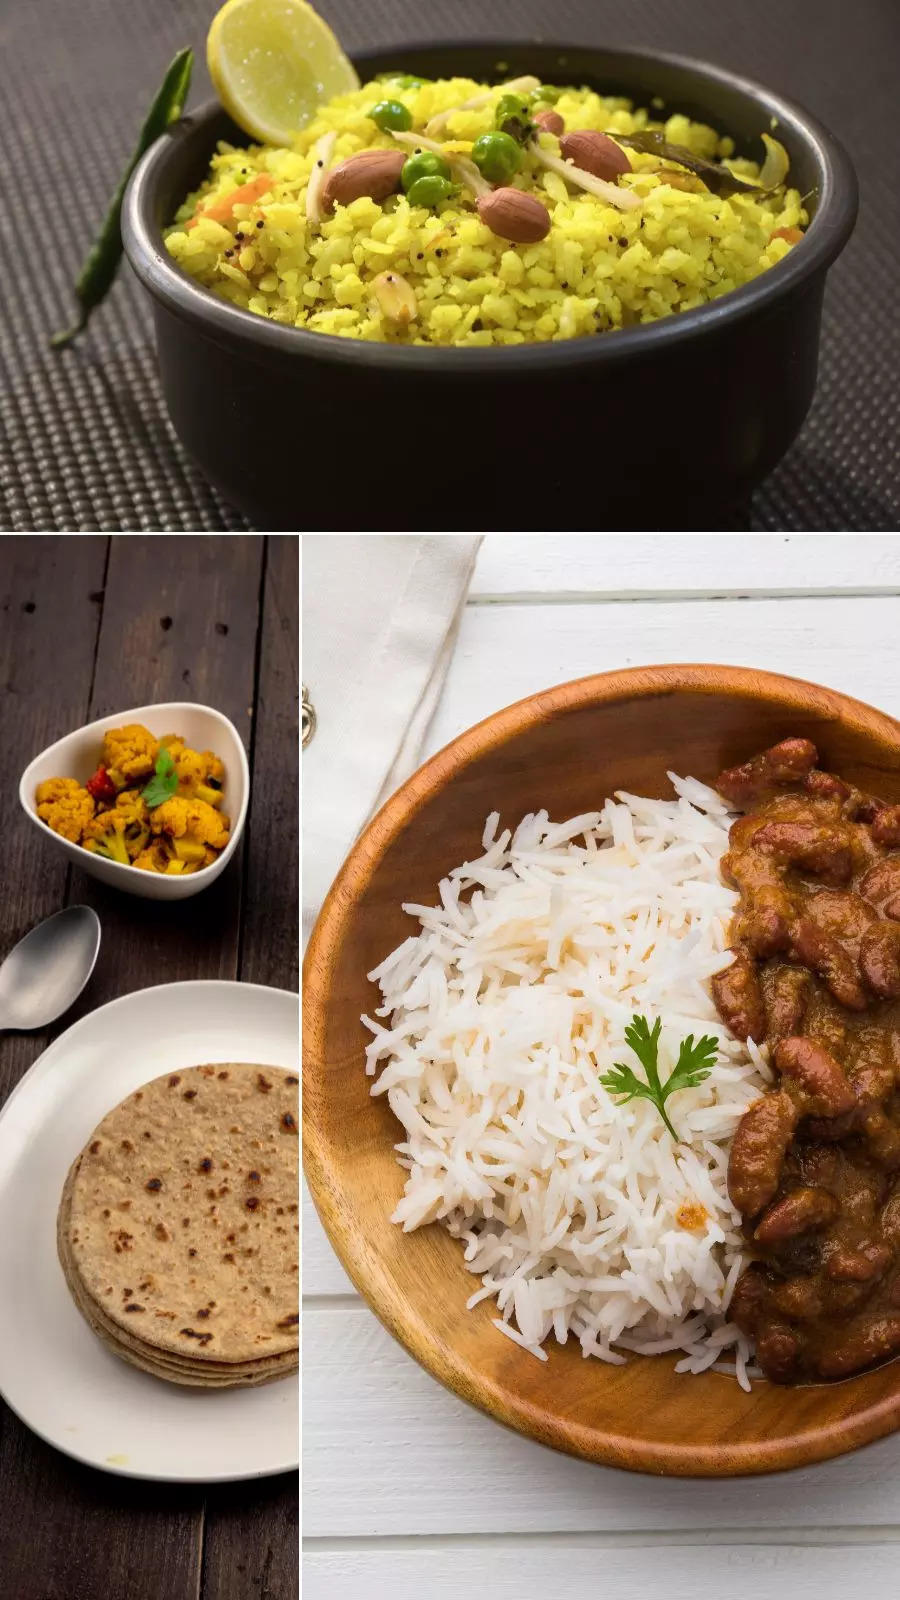 Delicious Indian vegetarian lunch ideas for office